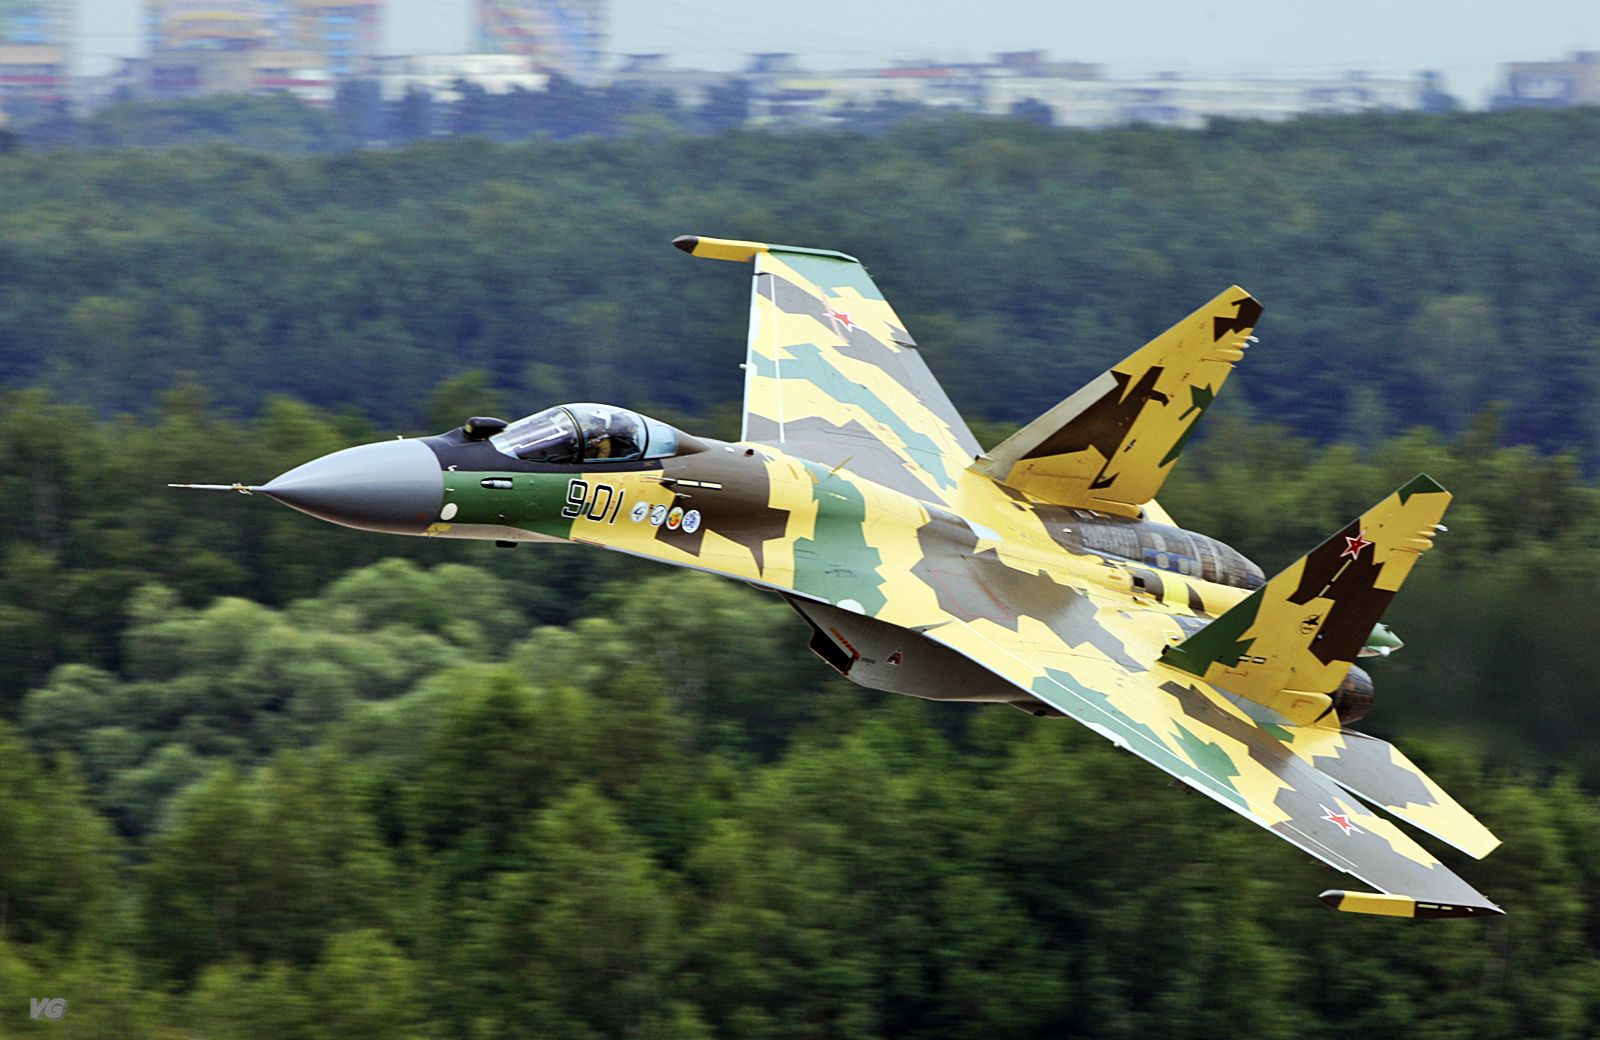 Sukhoi Su 27ub Russia Air Force Aviation Photo 1658637 | Images and ...